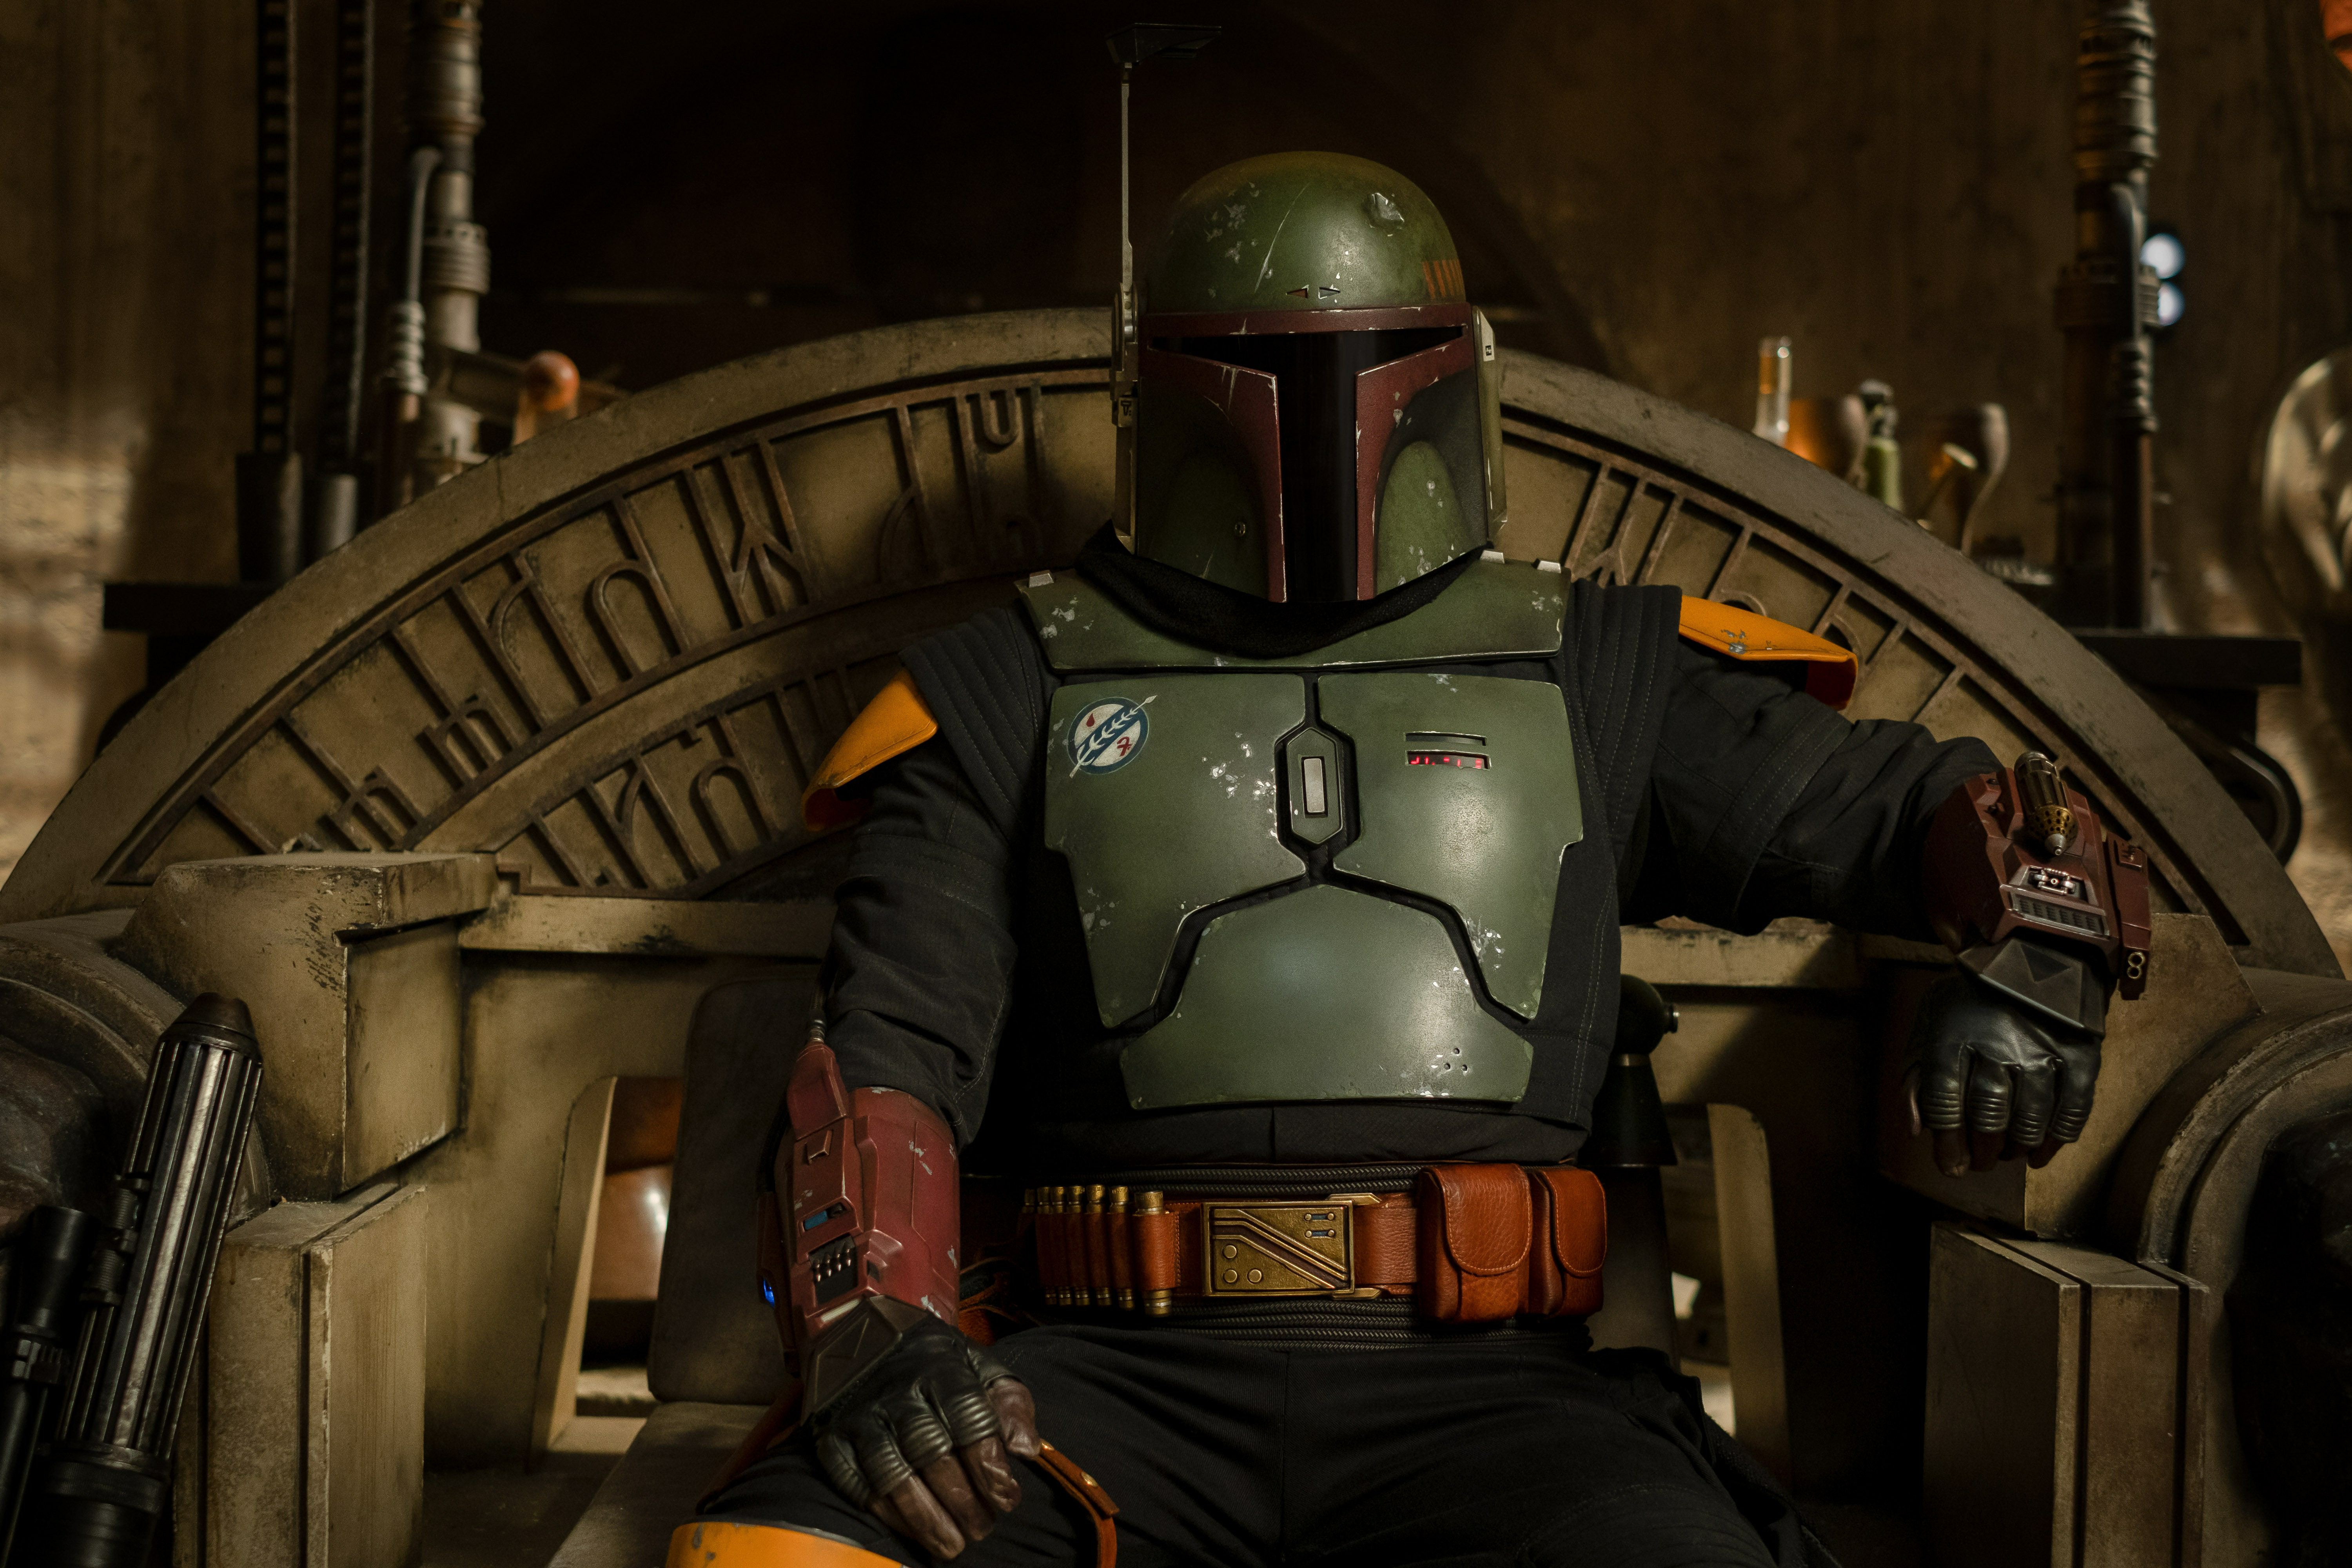 TV Show The Book of Boba Fett HD Wallpaper | Background Image